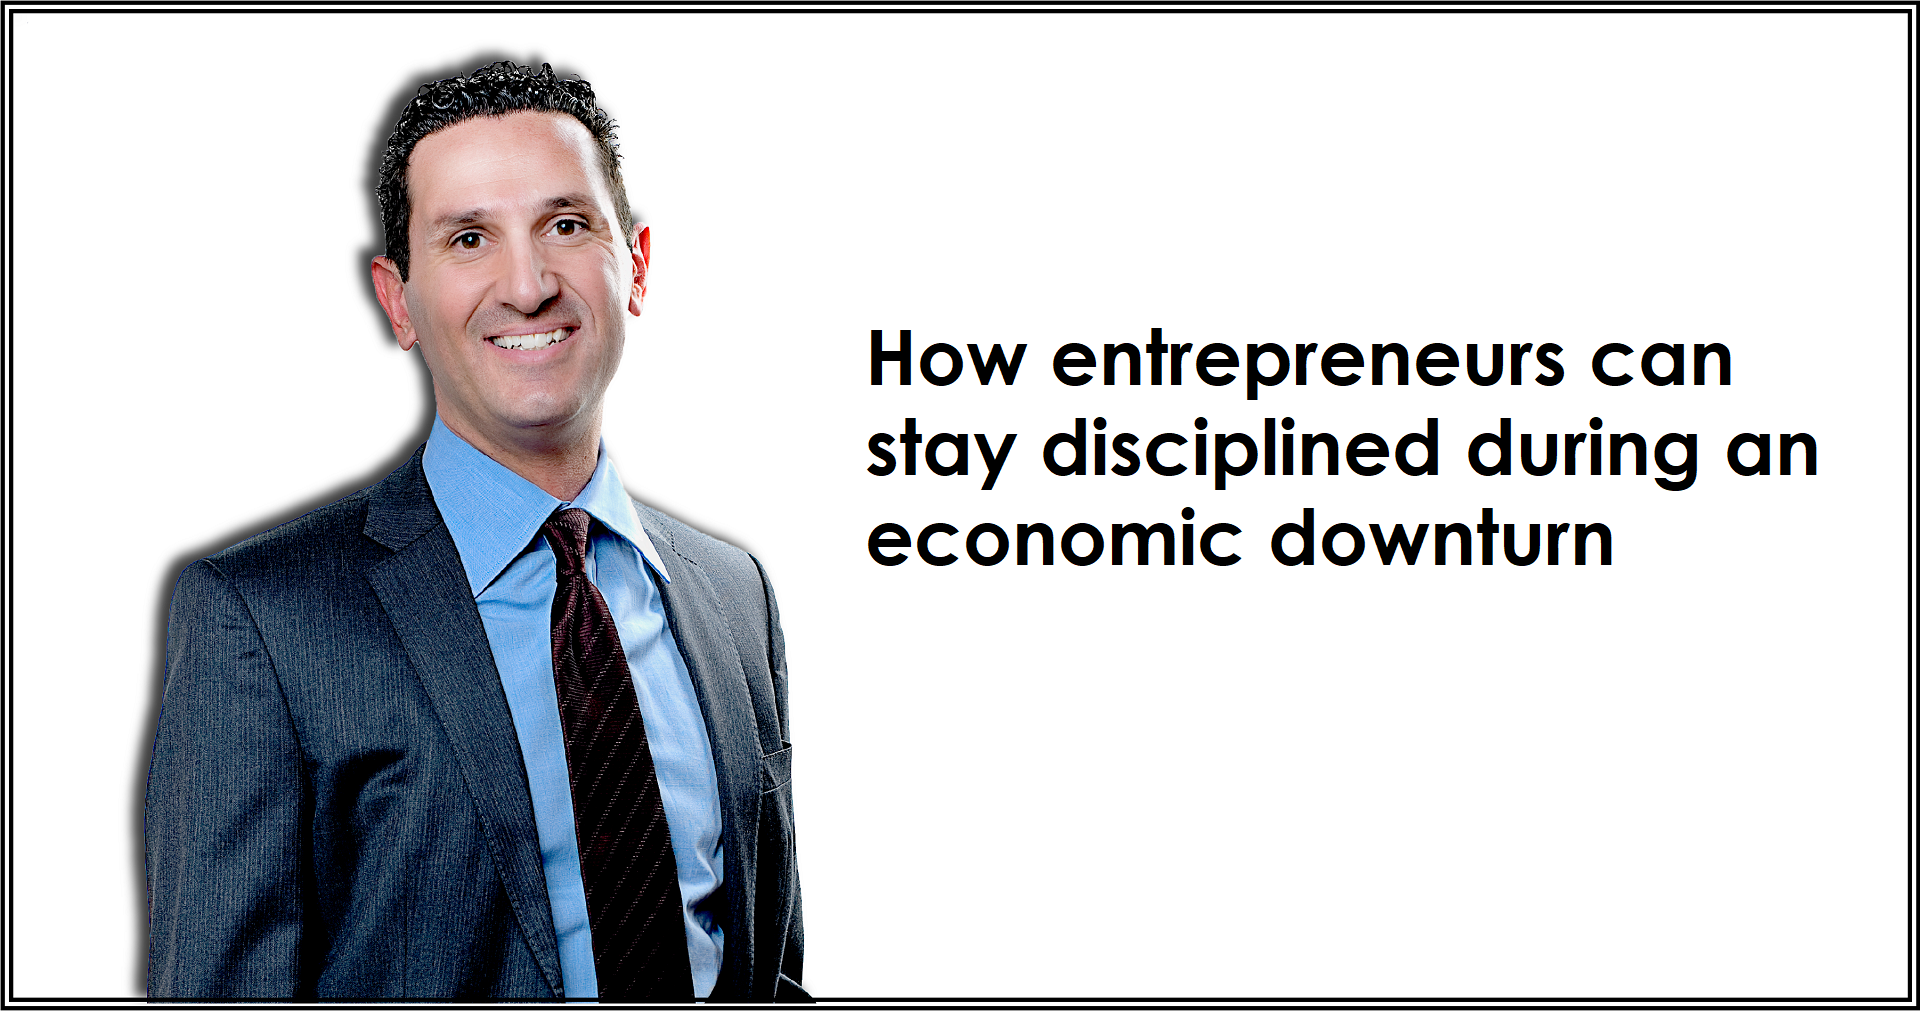 How can entrepreneurs stay disciplined during an economic downturn?